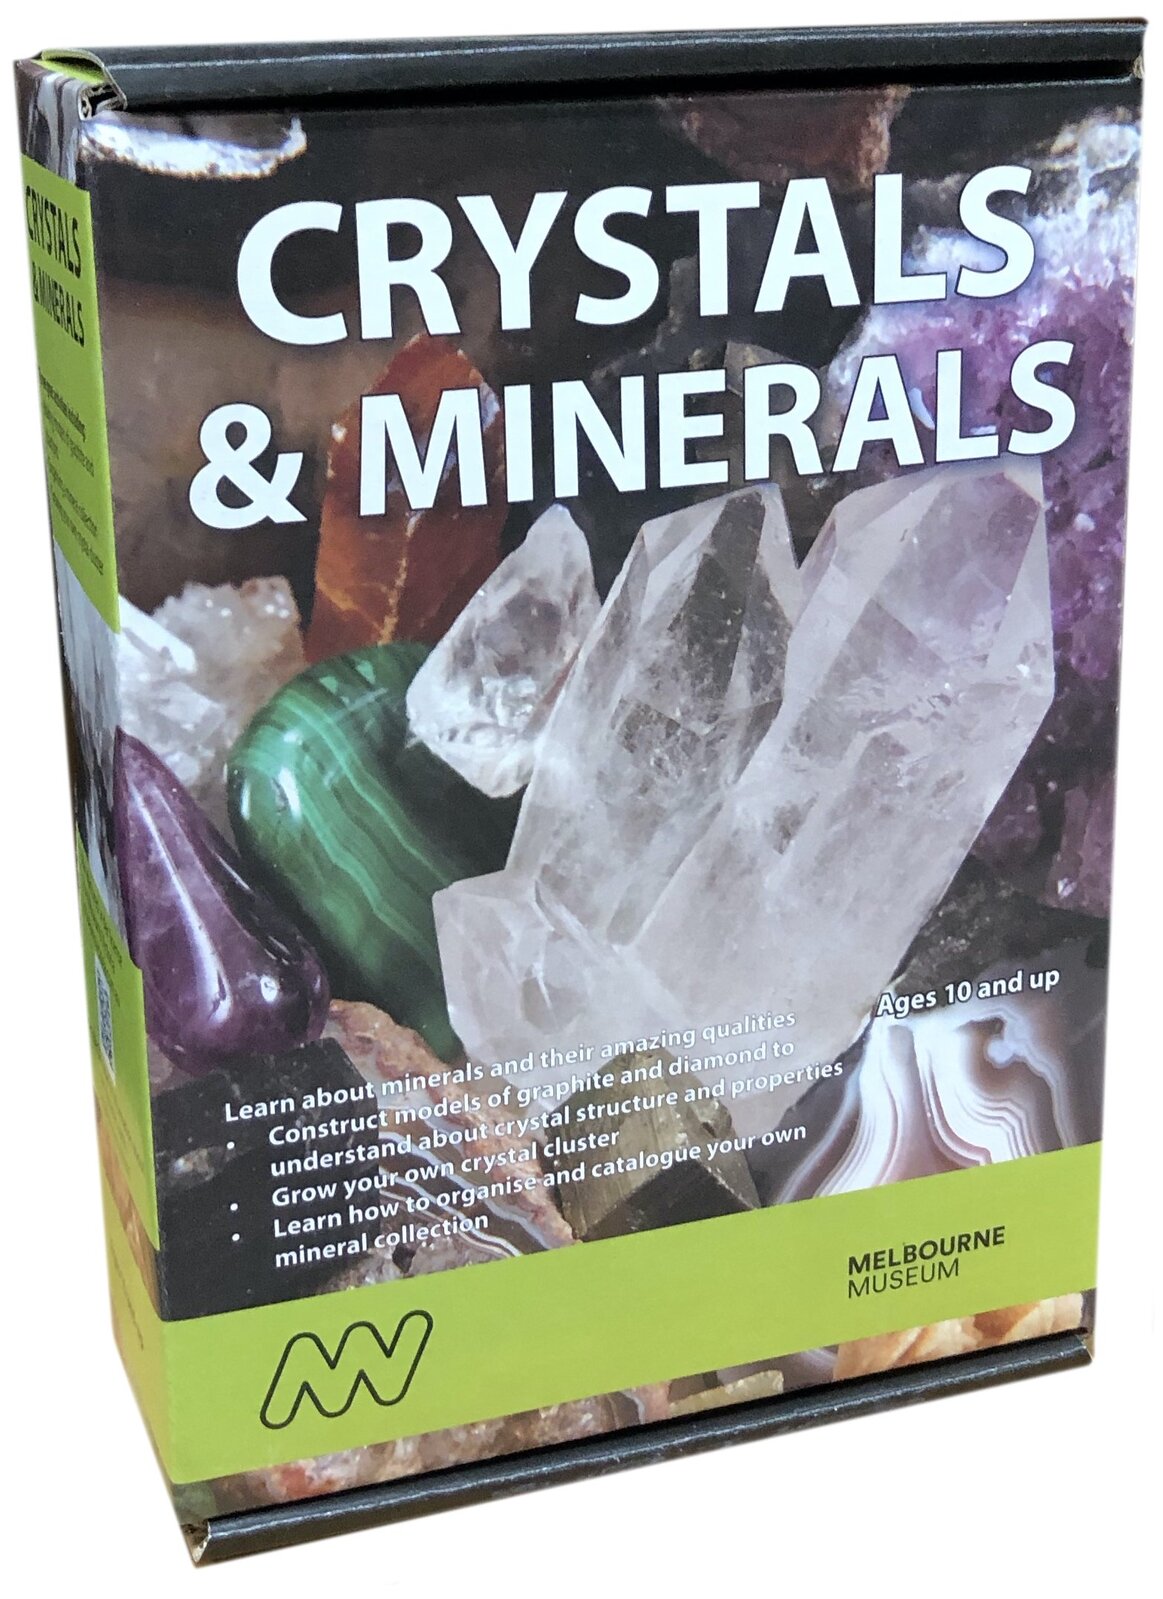 Crystals and Minerals image